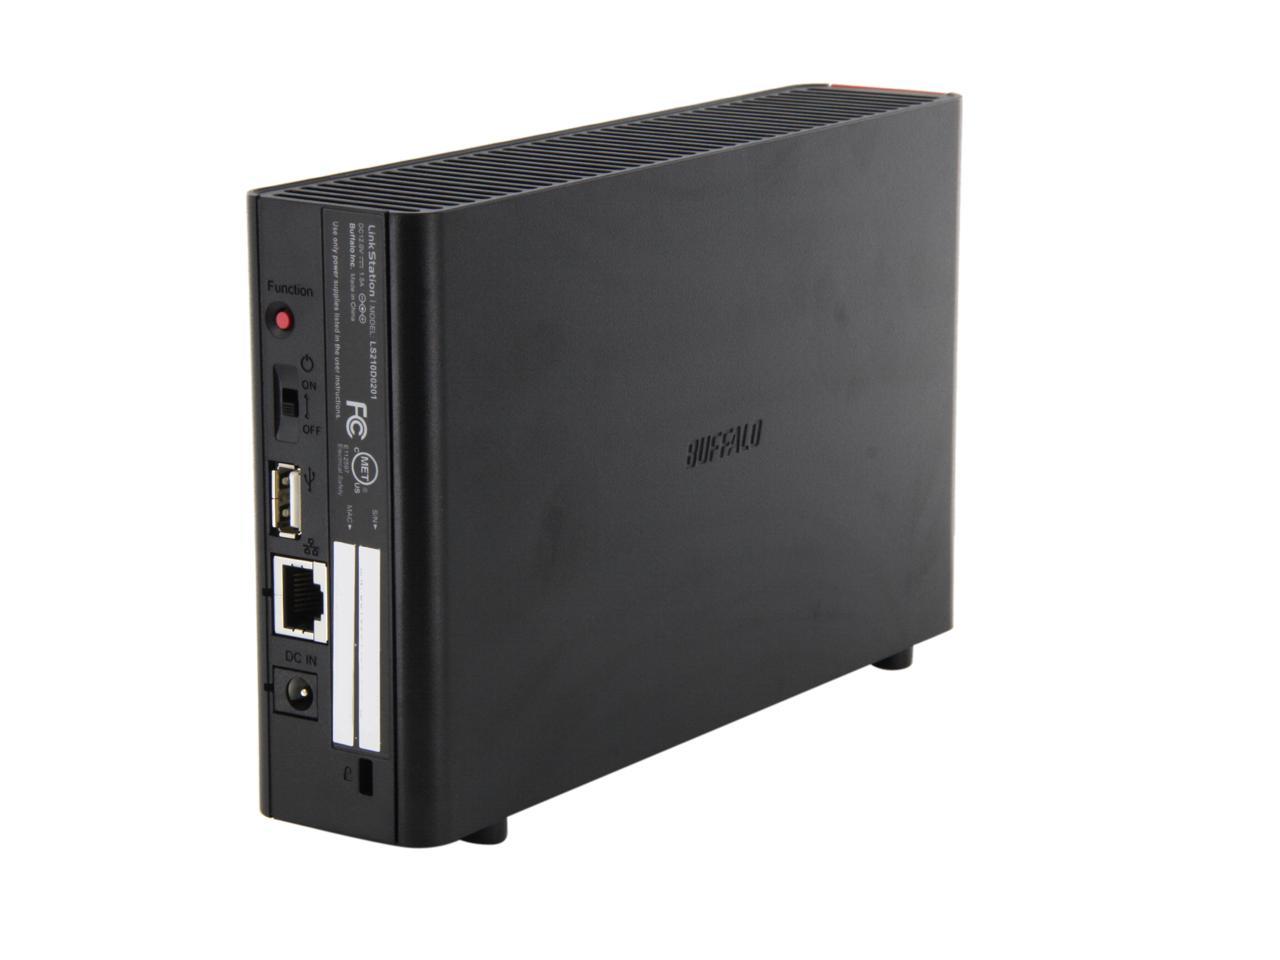 LinkStation 210 2TB Personal Cloud Storage with Hard Drives Included